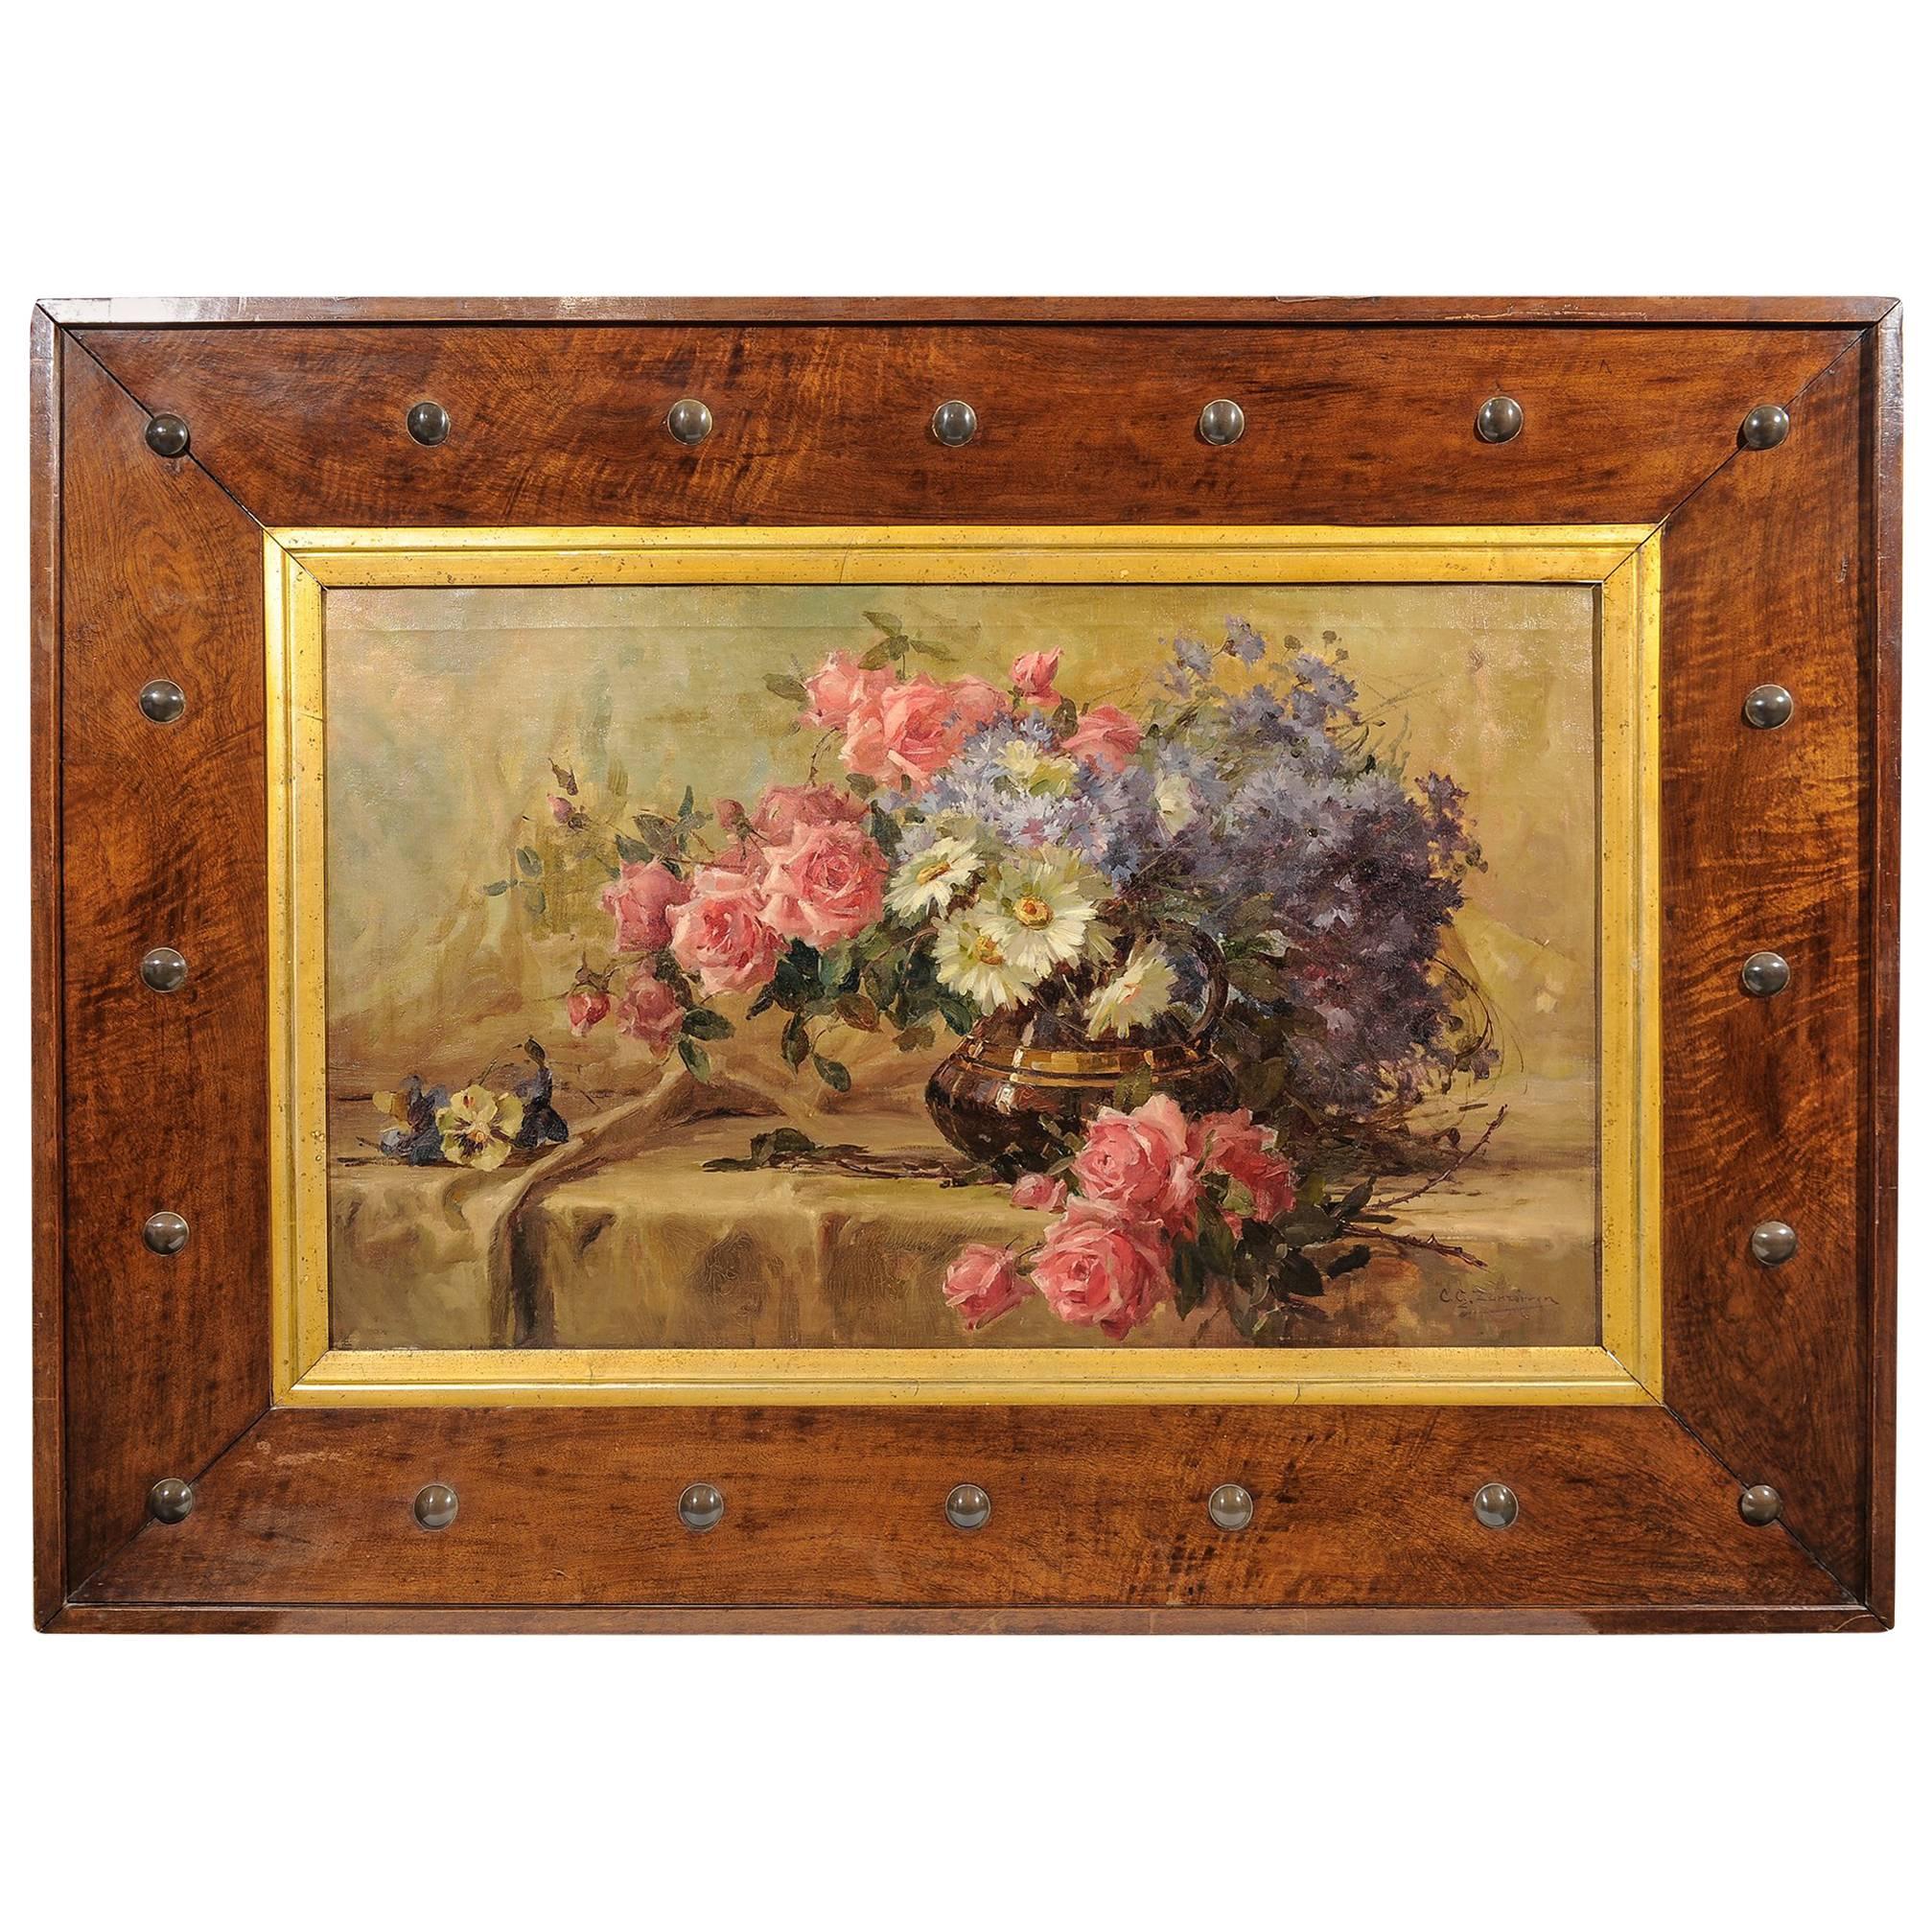 Roses Painting in a Large Unusual Deco Wooden Frame